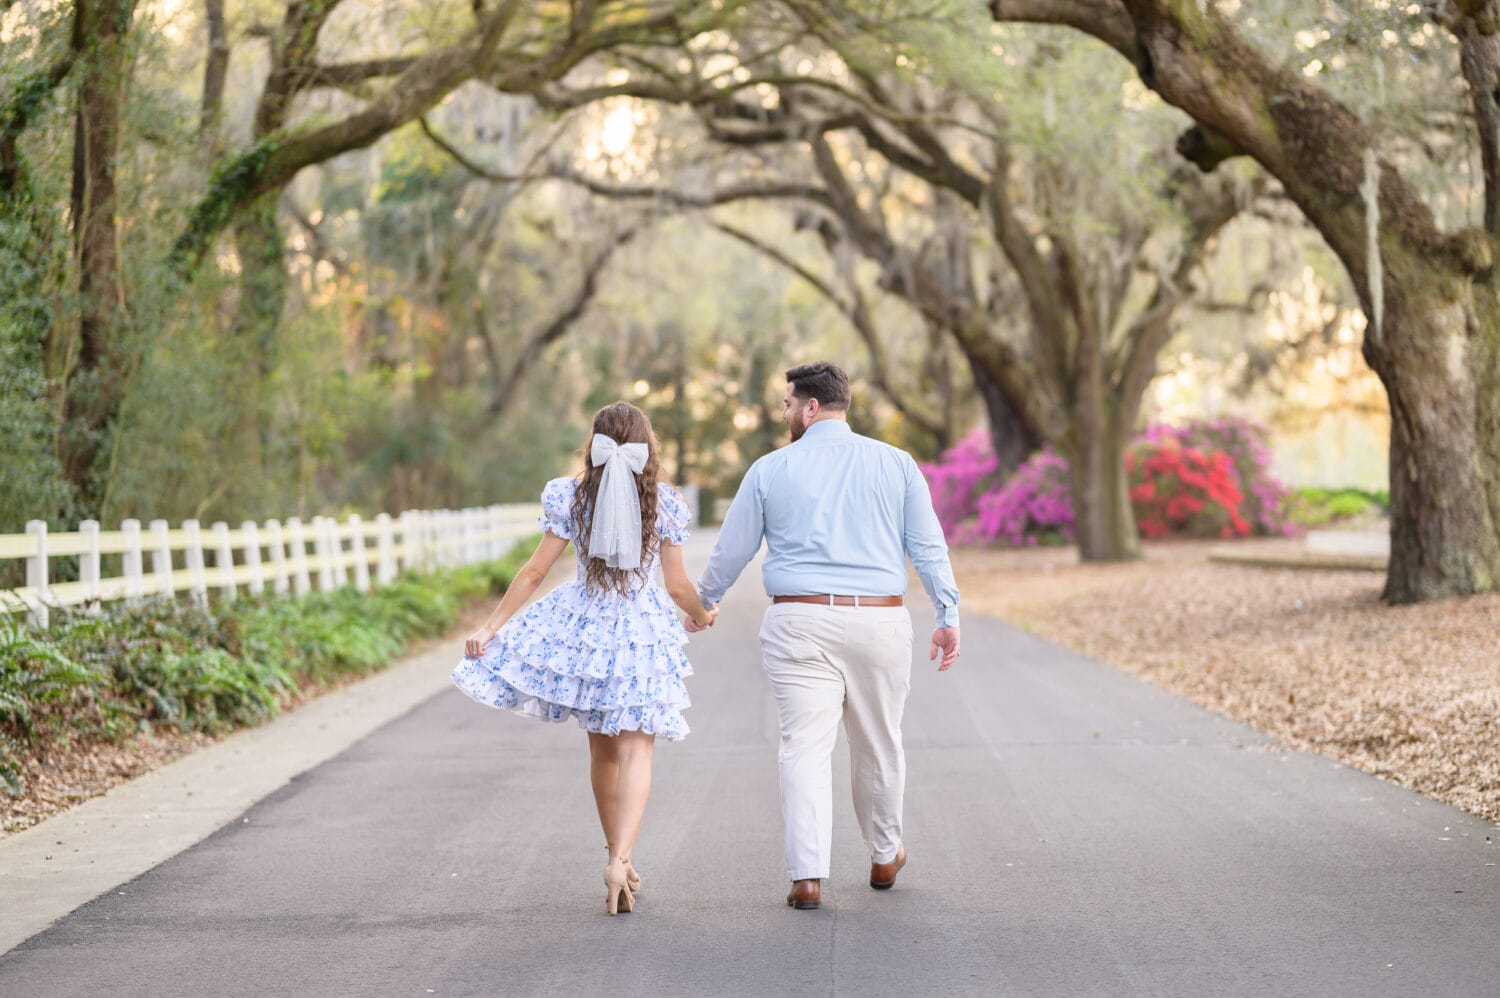 Holding hands walking under the oaks - Caledonia Golf and Fish Club